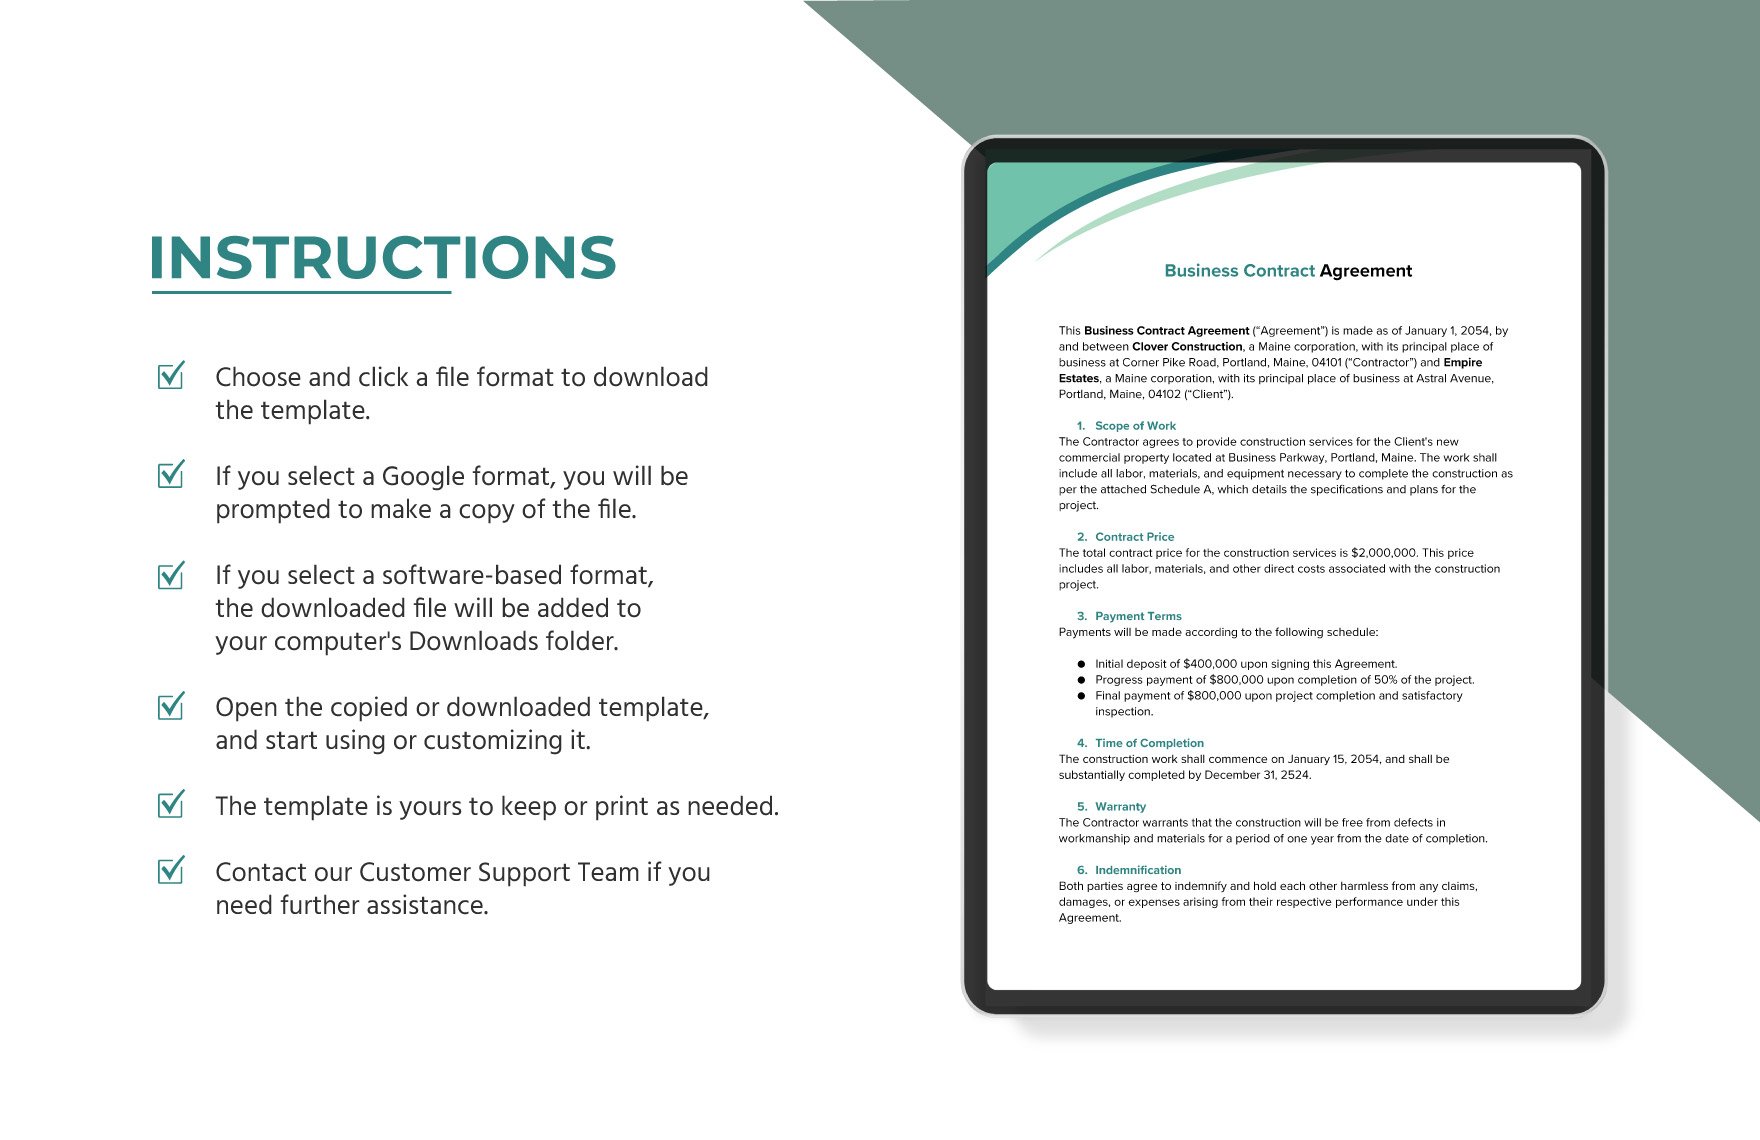 Business Contract Agreement Template